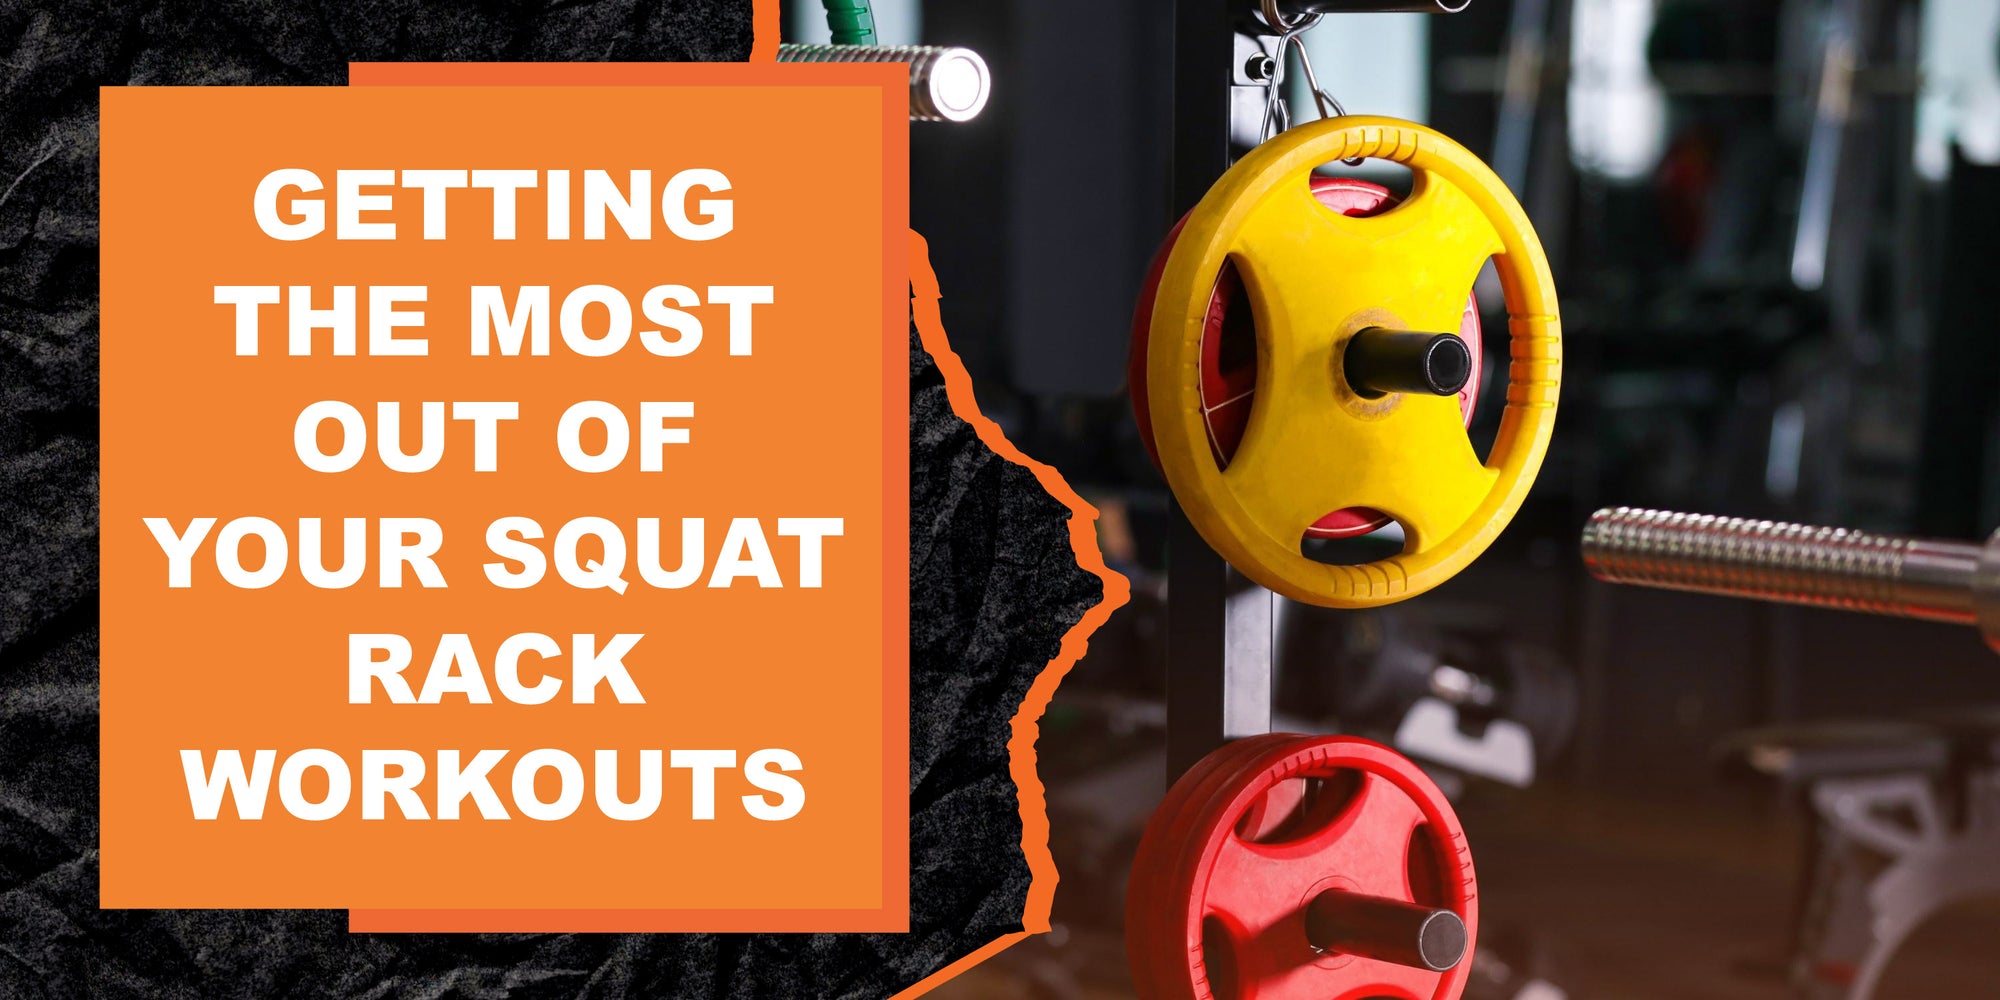 Getting the Most Out of Your Squat Rack Workouts